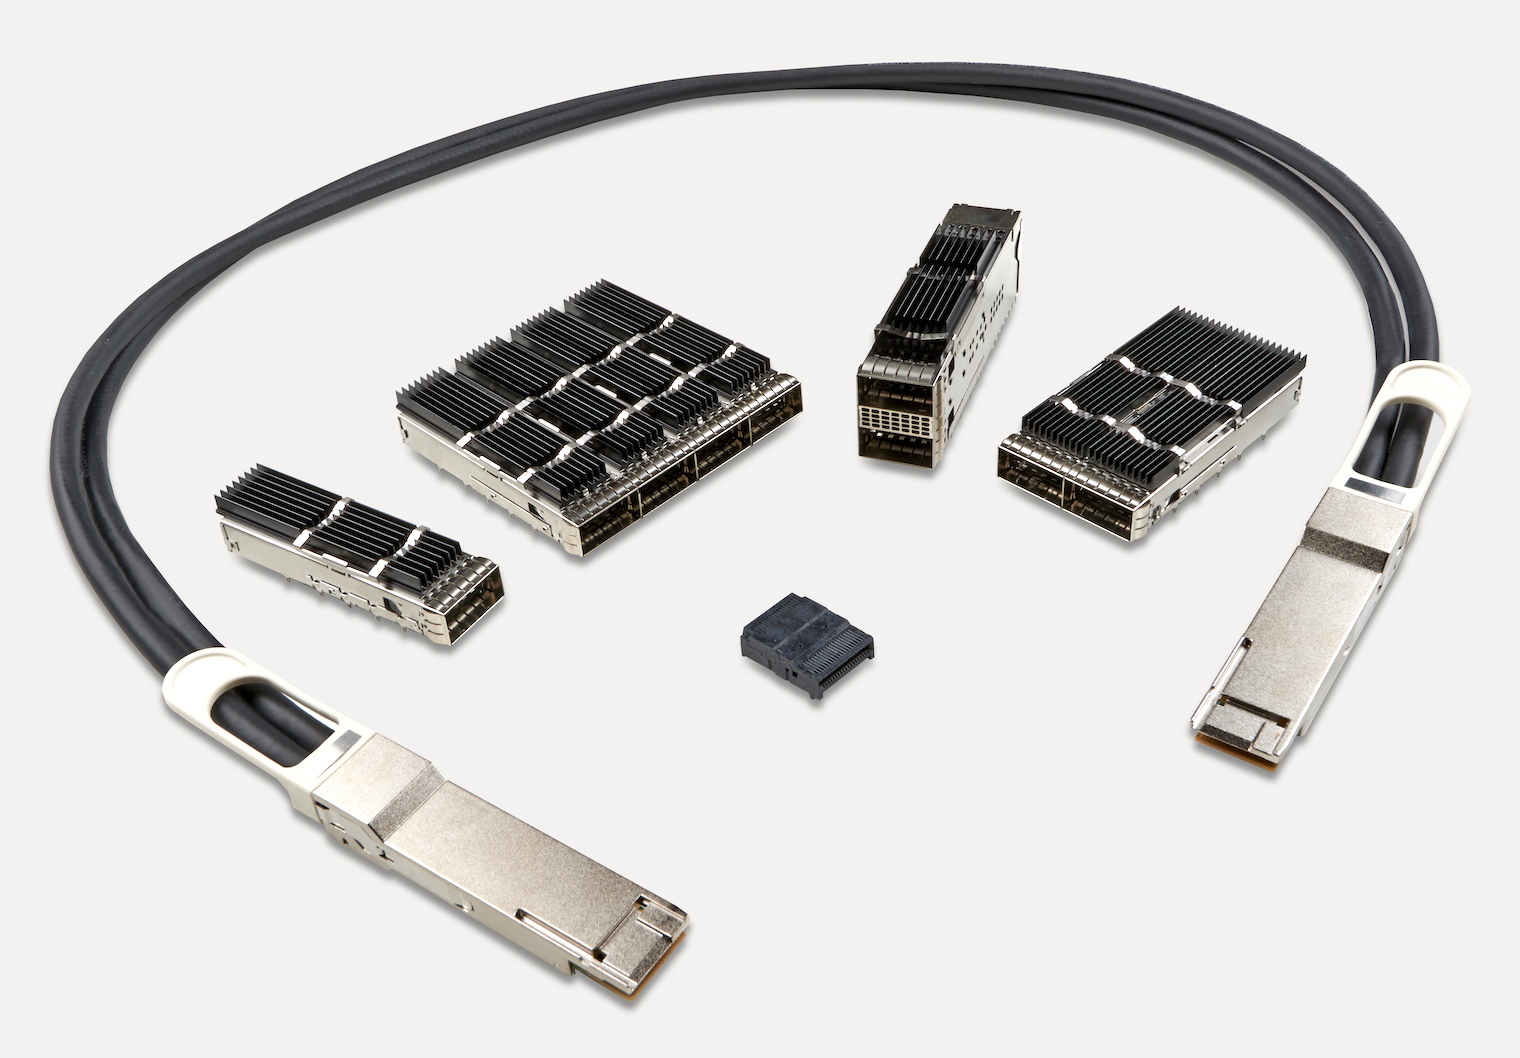 new connectivity products: July 2019, TE Connectivity QSFP-DD connectors, cages, and cable assemblies